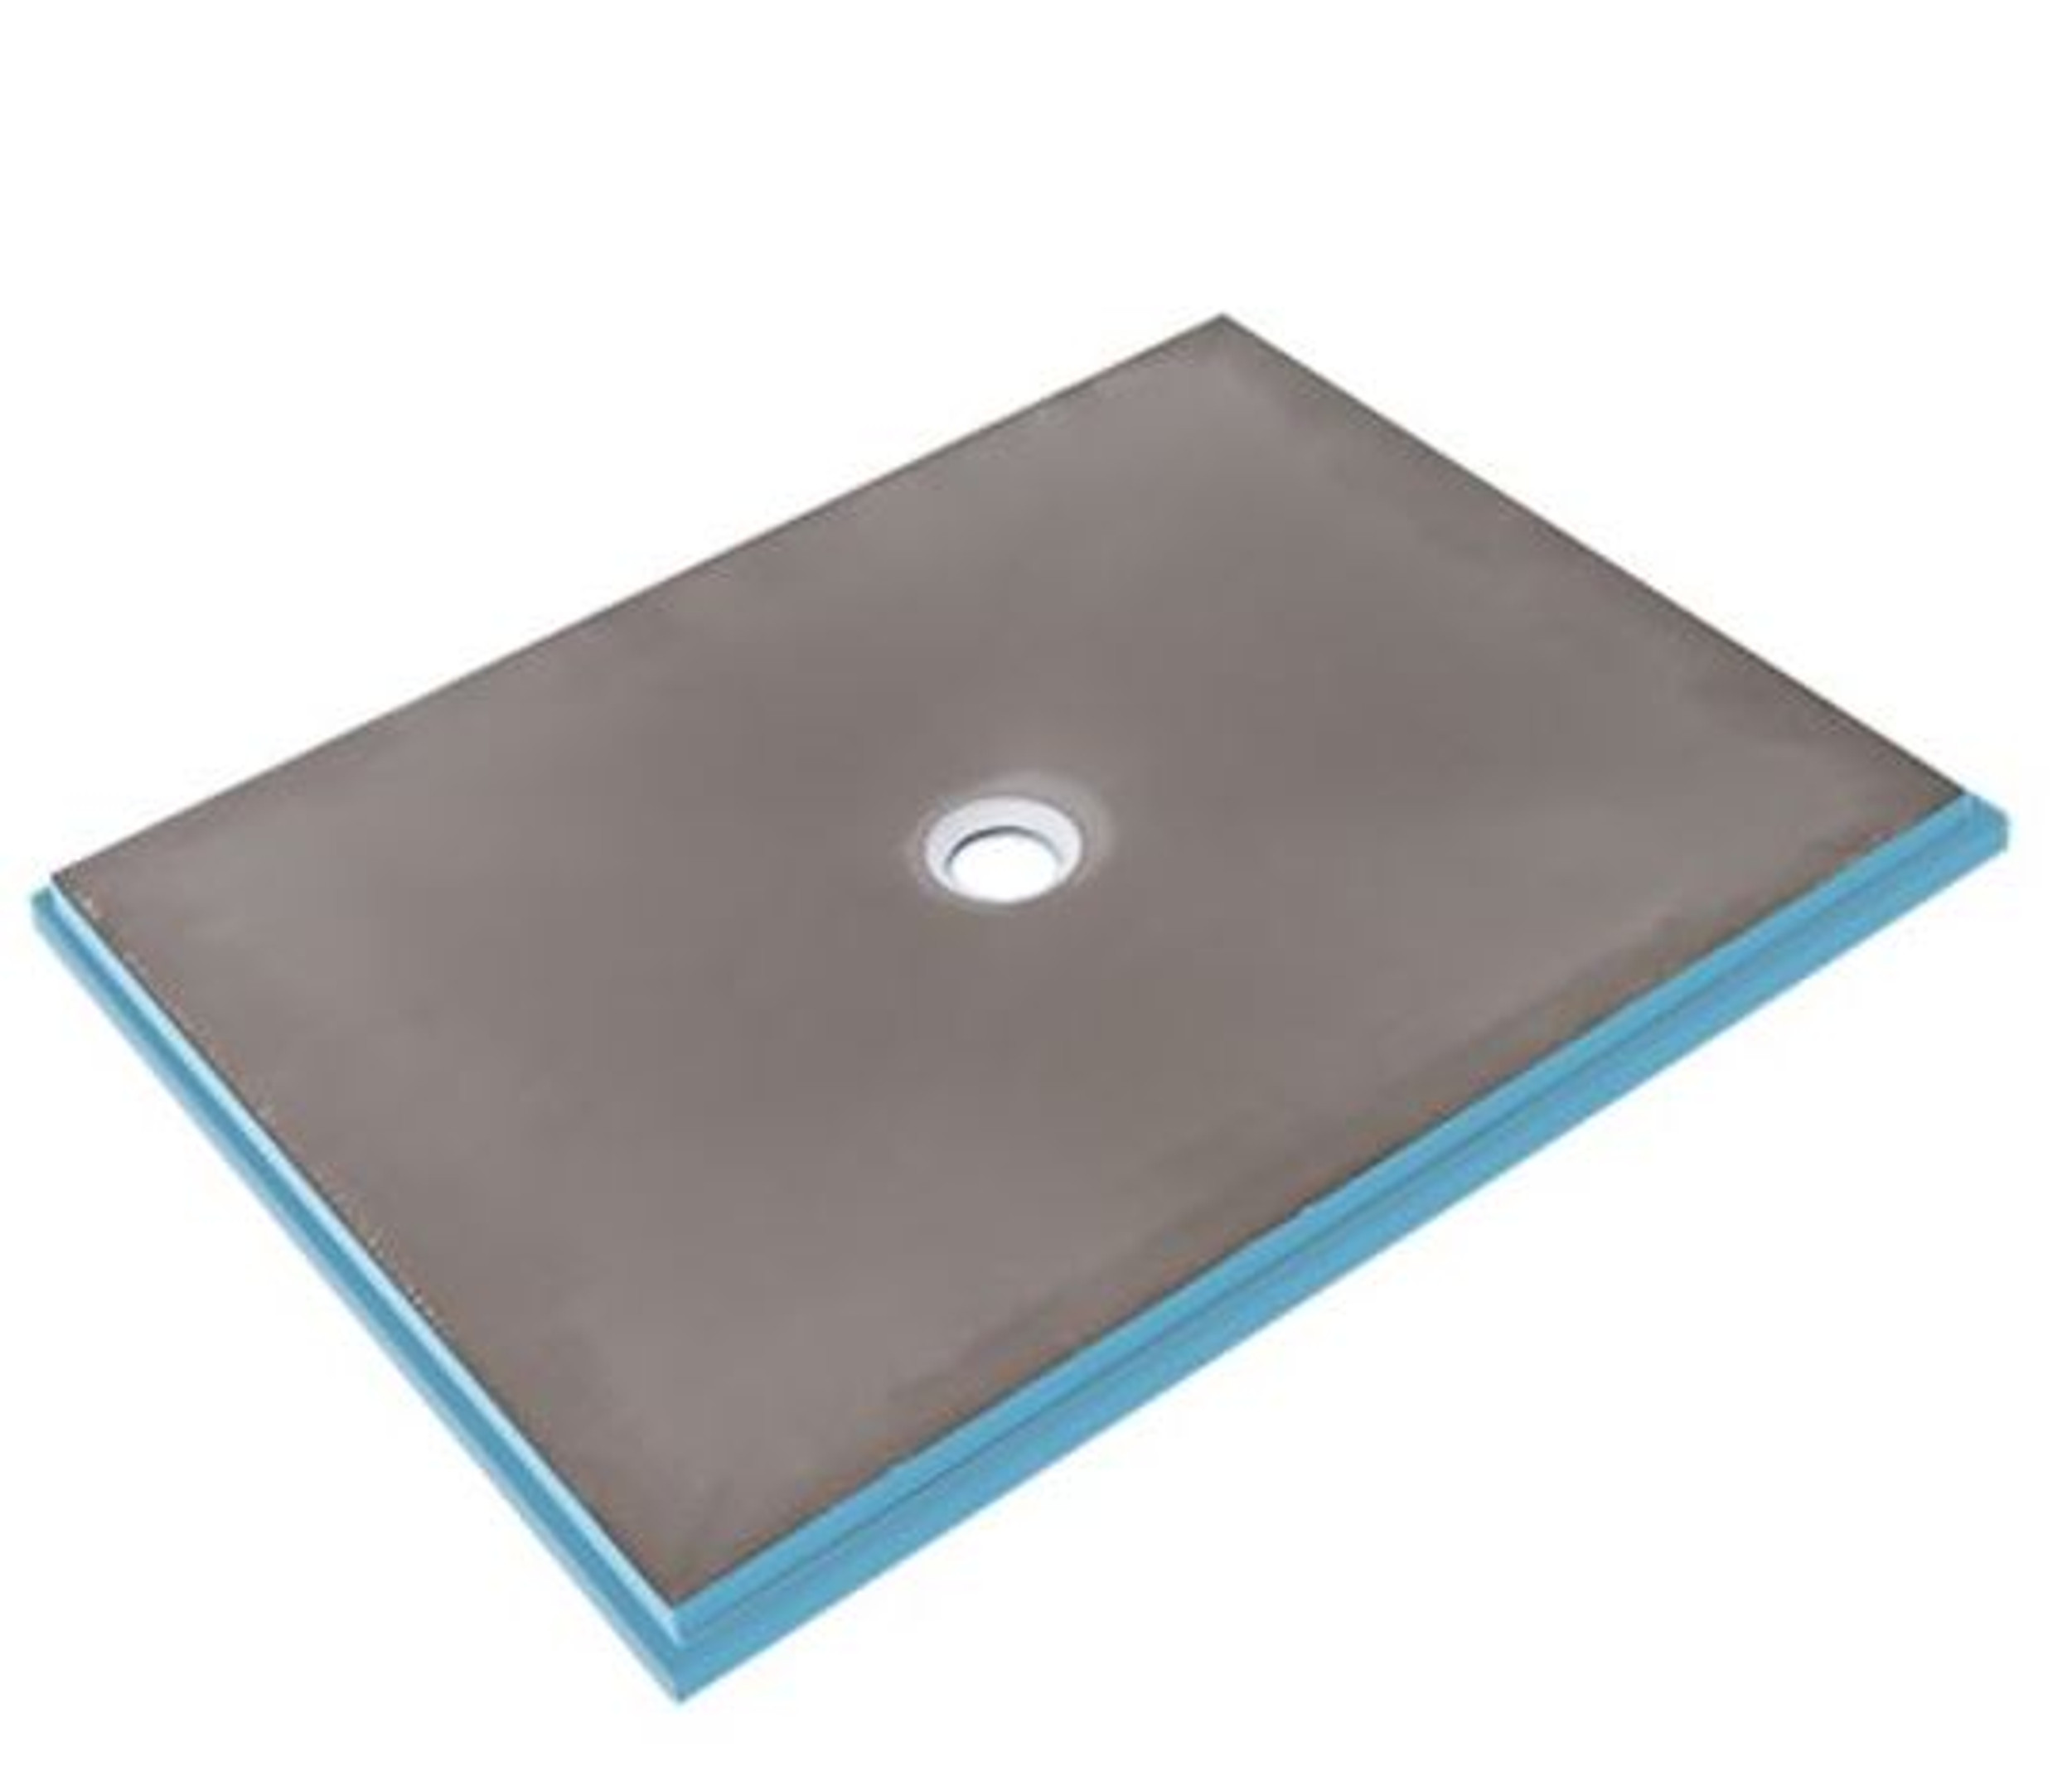 Wedi Fundo Primo® Shower Base 36 in. x 48 in. Center Drain 073735516

Shower installations have never been simpler than with the Wedi Fundo Primo shower base center drain. This 36" x 48" shower floor base is not only waterproof and mold resistant, it's also pre-sloped and features a centrally positioned drain. The innovative design eliminates the time consuming steps and expensive products traditionally involved in typical mortar bed, semi pre-fabricated sheet or liquid membrane system installations.